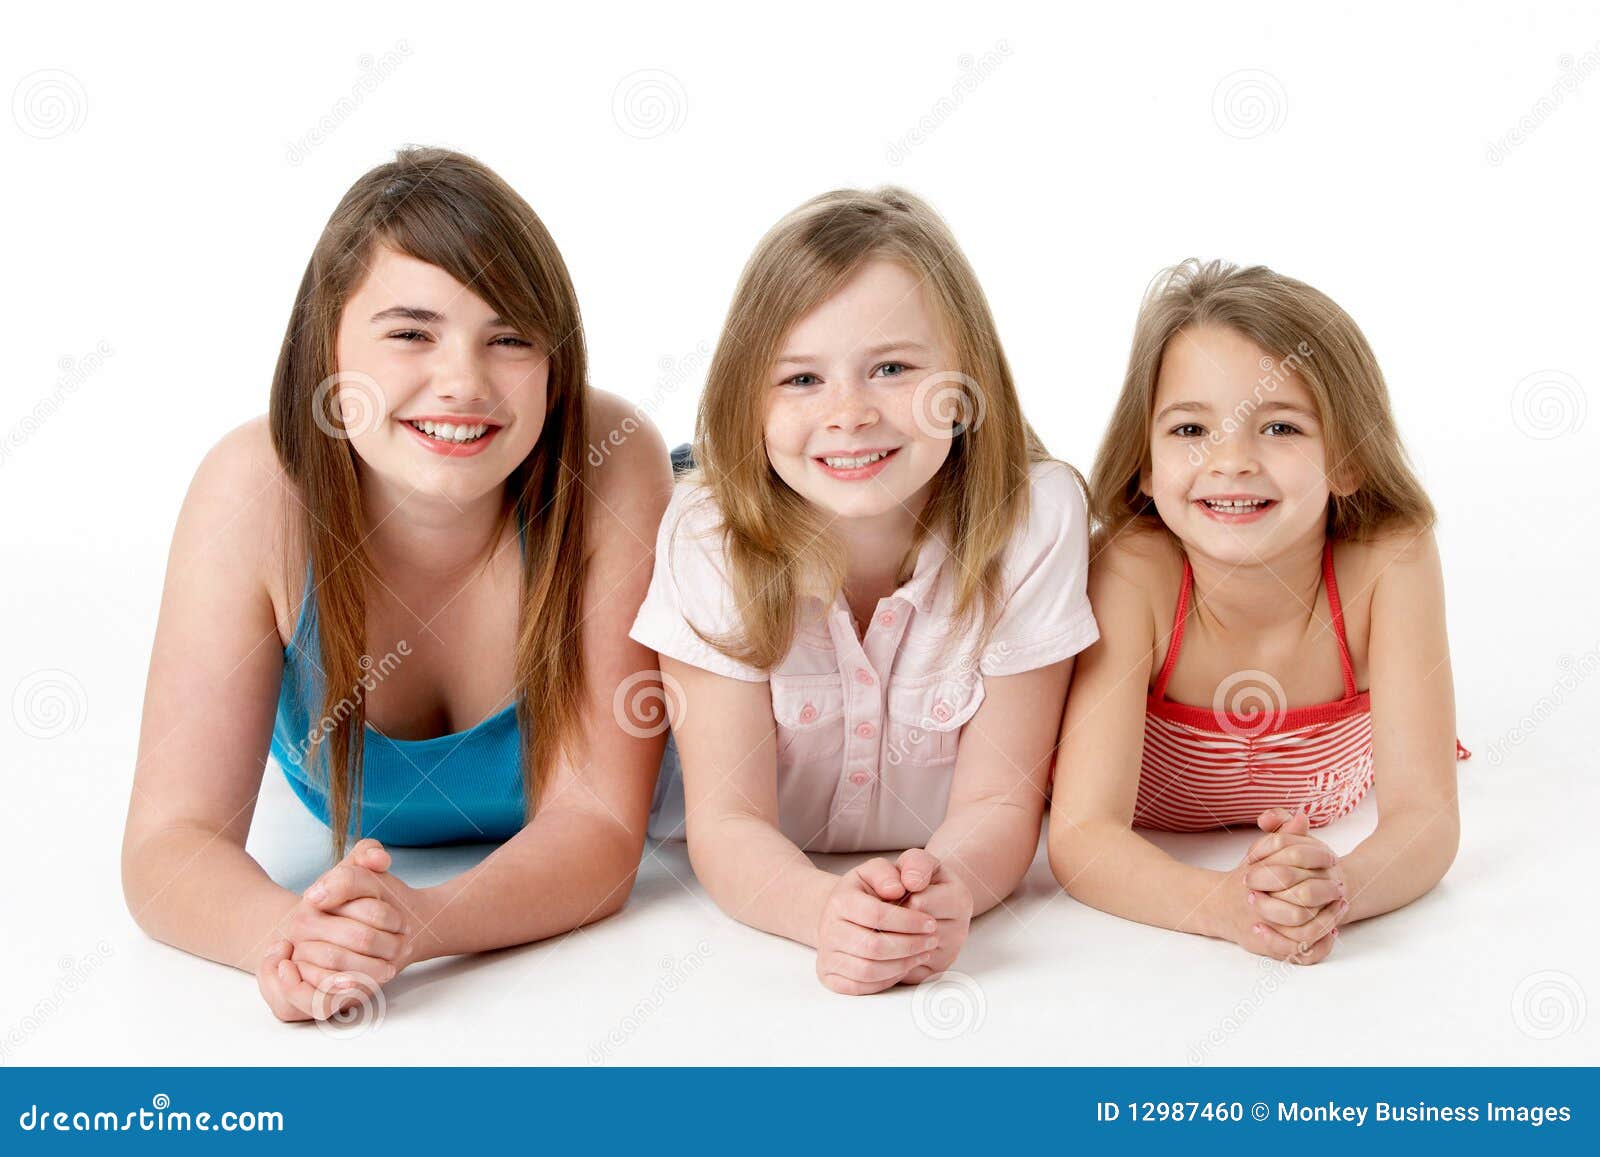 three girls piled up in pyramid in studio